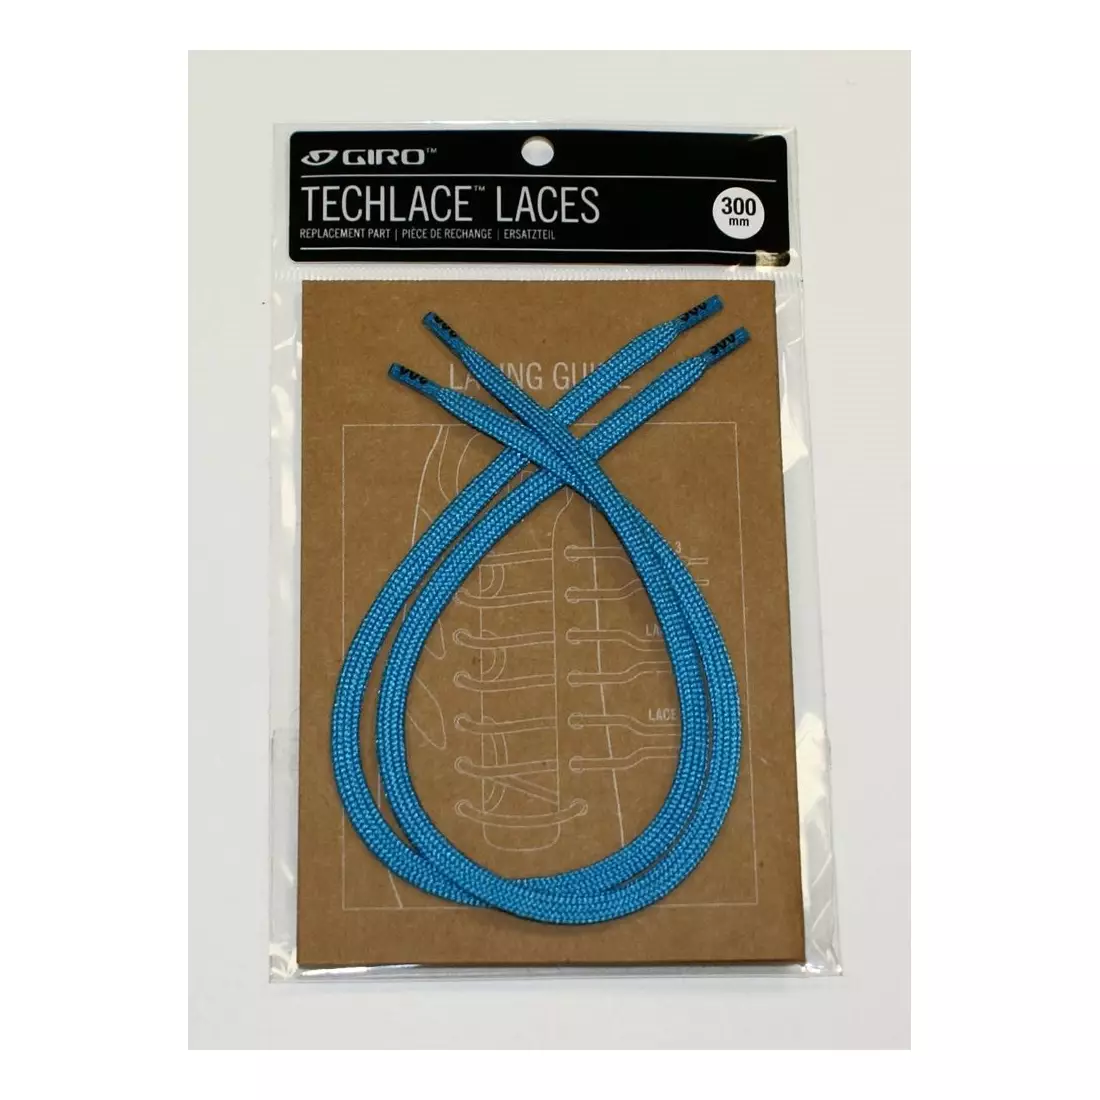 GIRO laces for cycling shoes TECHLACE LACES blue jewel GR-7093299